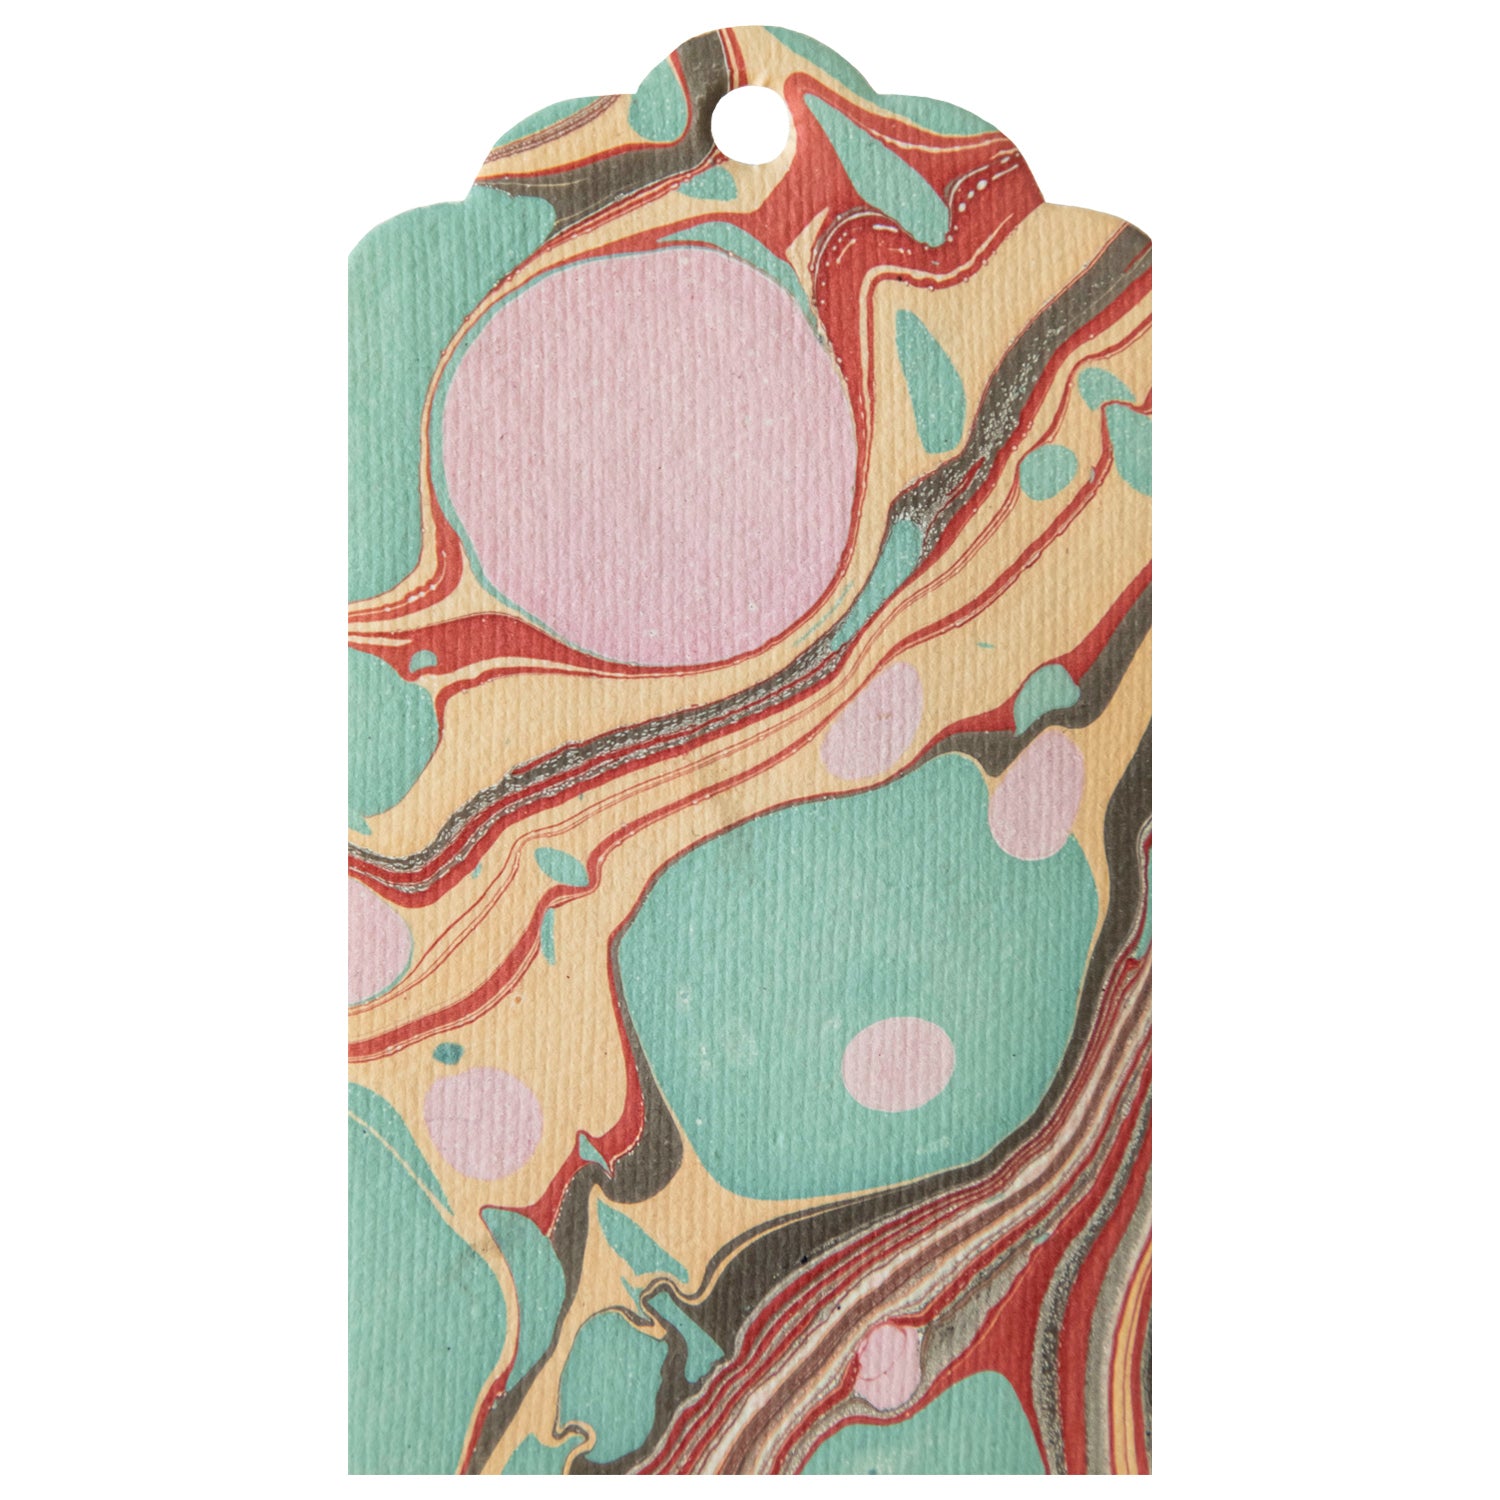 A Stone Marbled Gift Tag, with a unique finishing touch, featuring a pink, green, and blue marble design by Hester &amp; Cook.